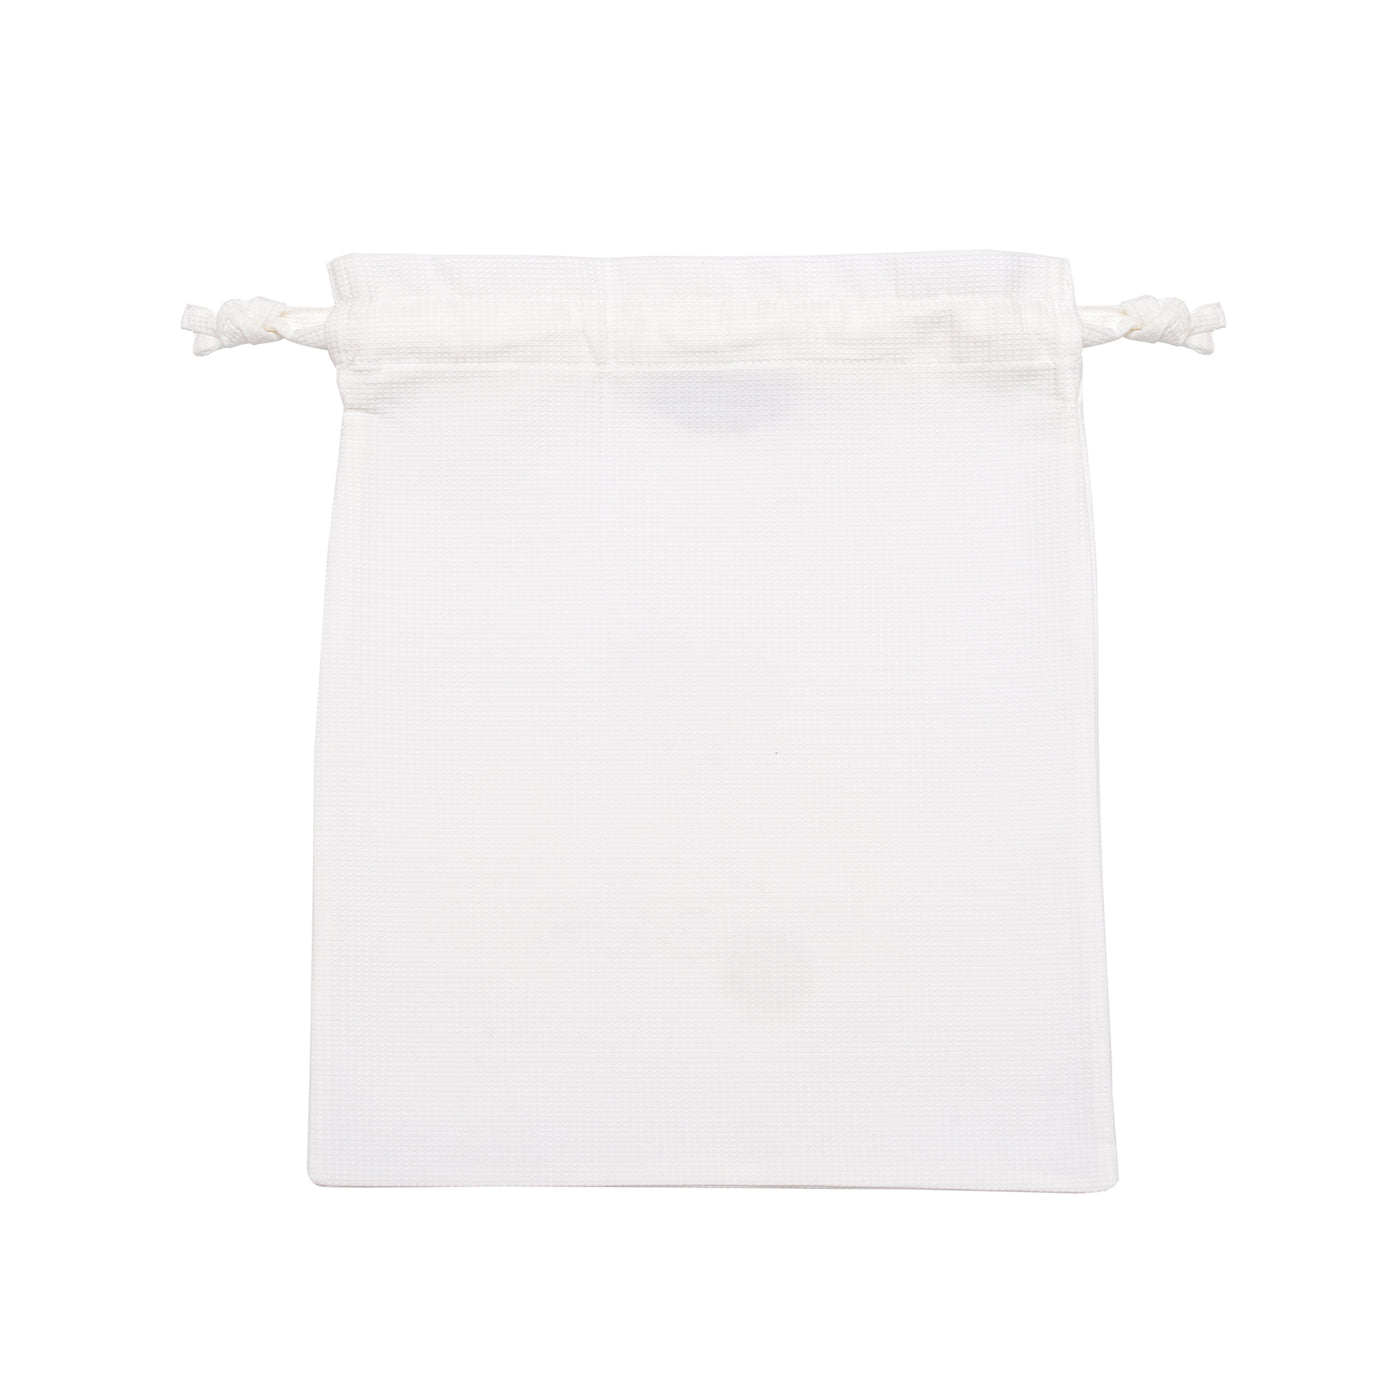 Milan Luxury Waffle Plain Drawstring Bag Collection in White and Black